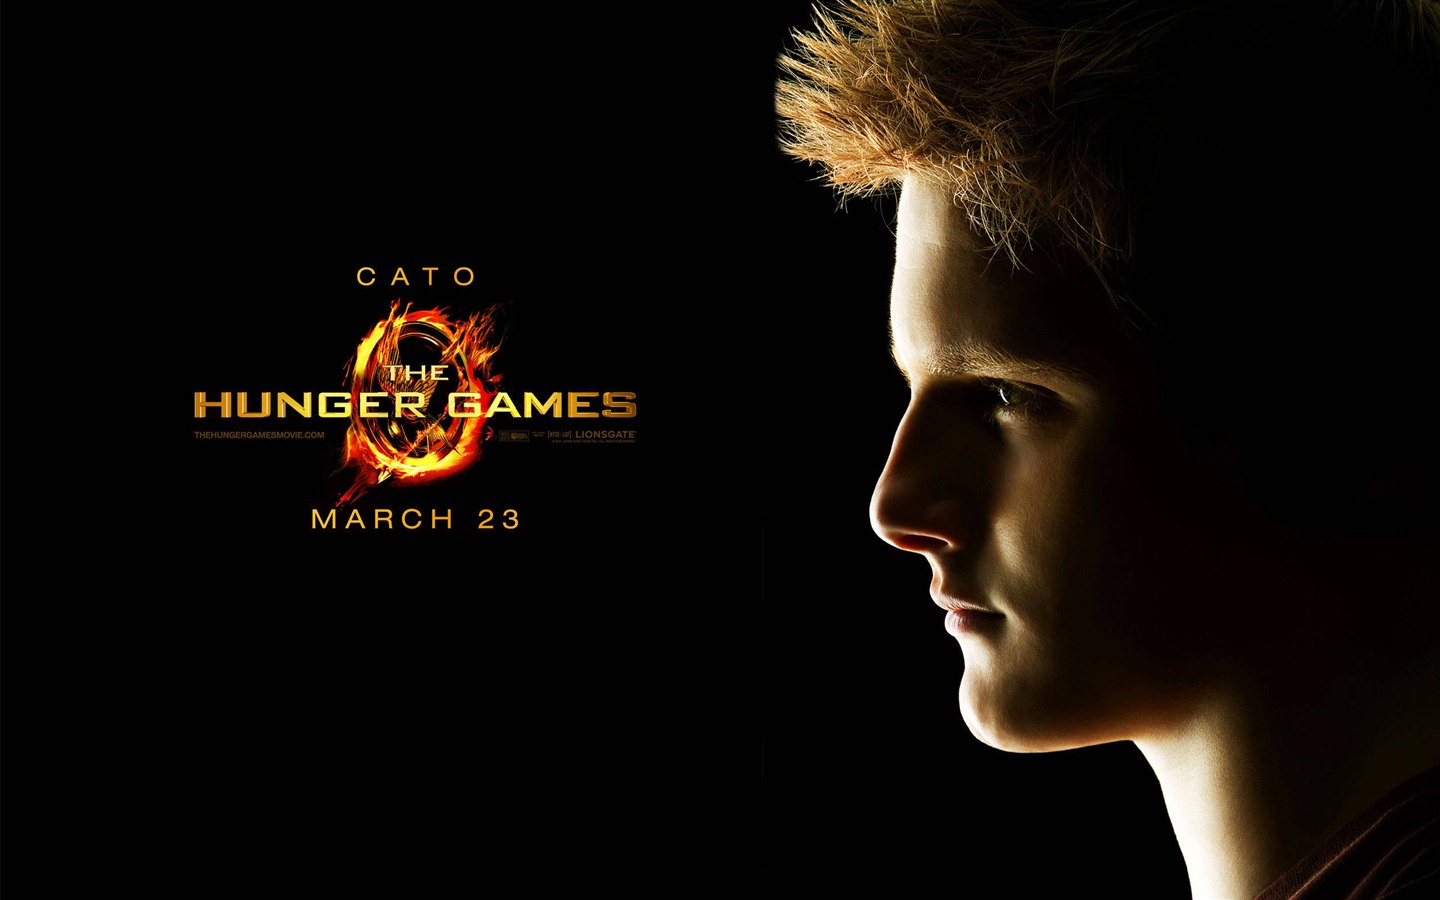 The Hunger Games HD wallpapers #3 - 1440x900